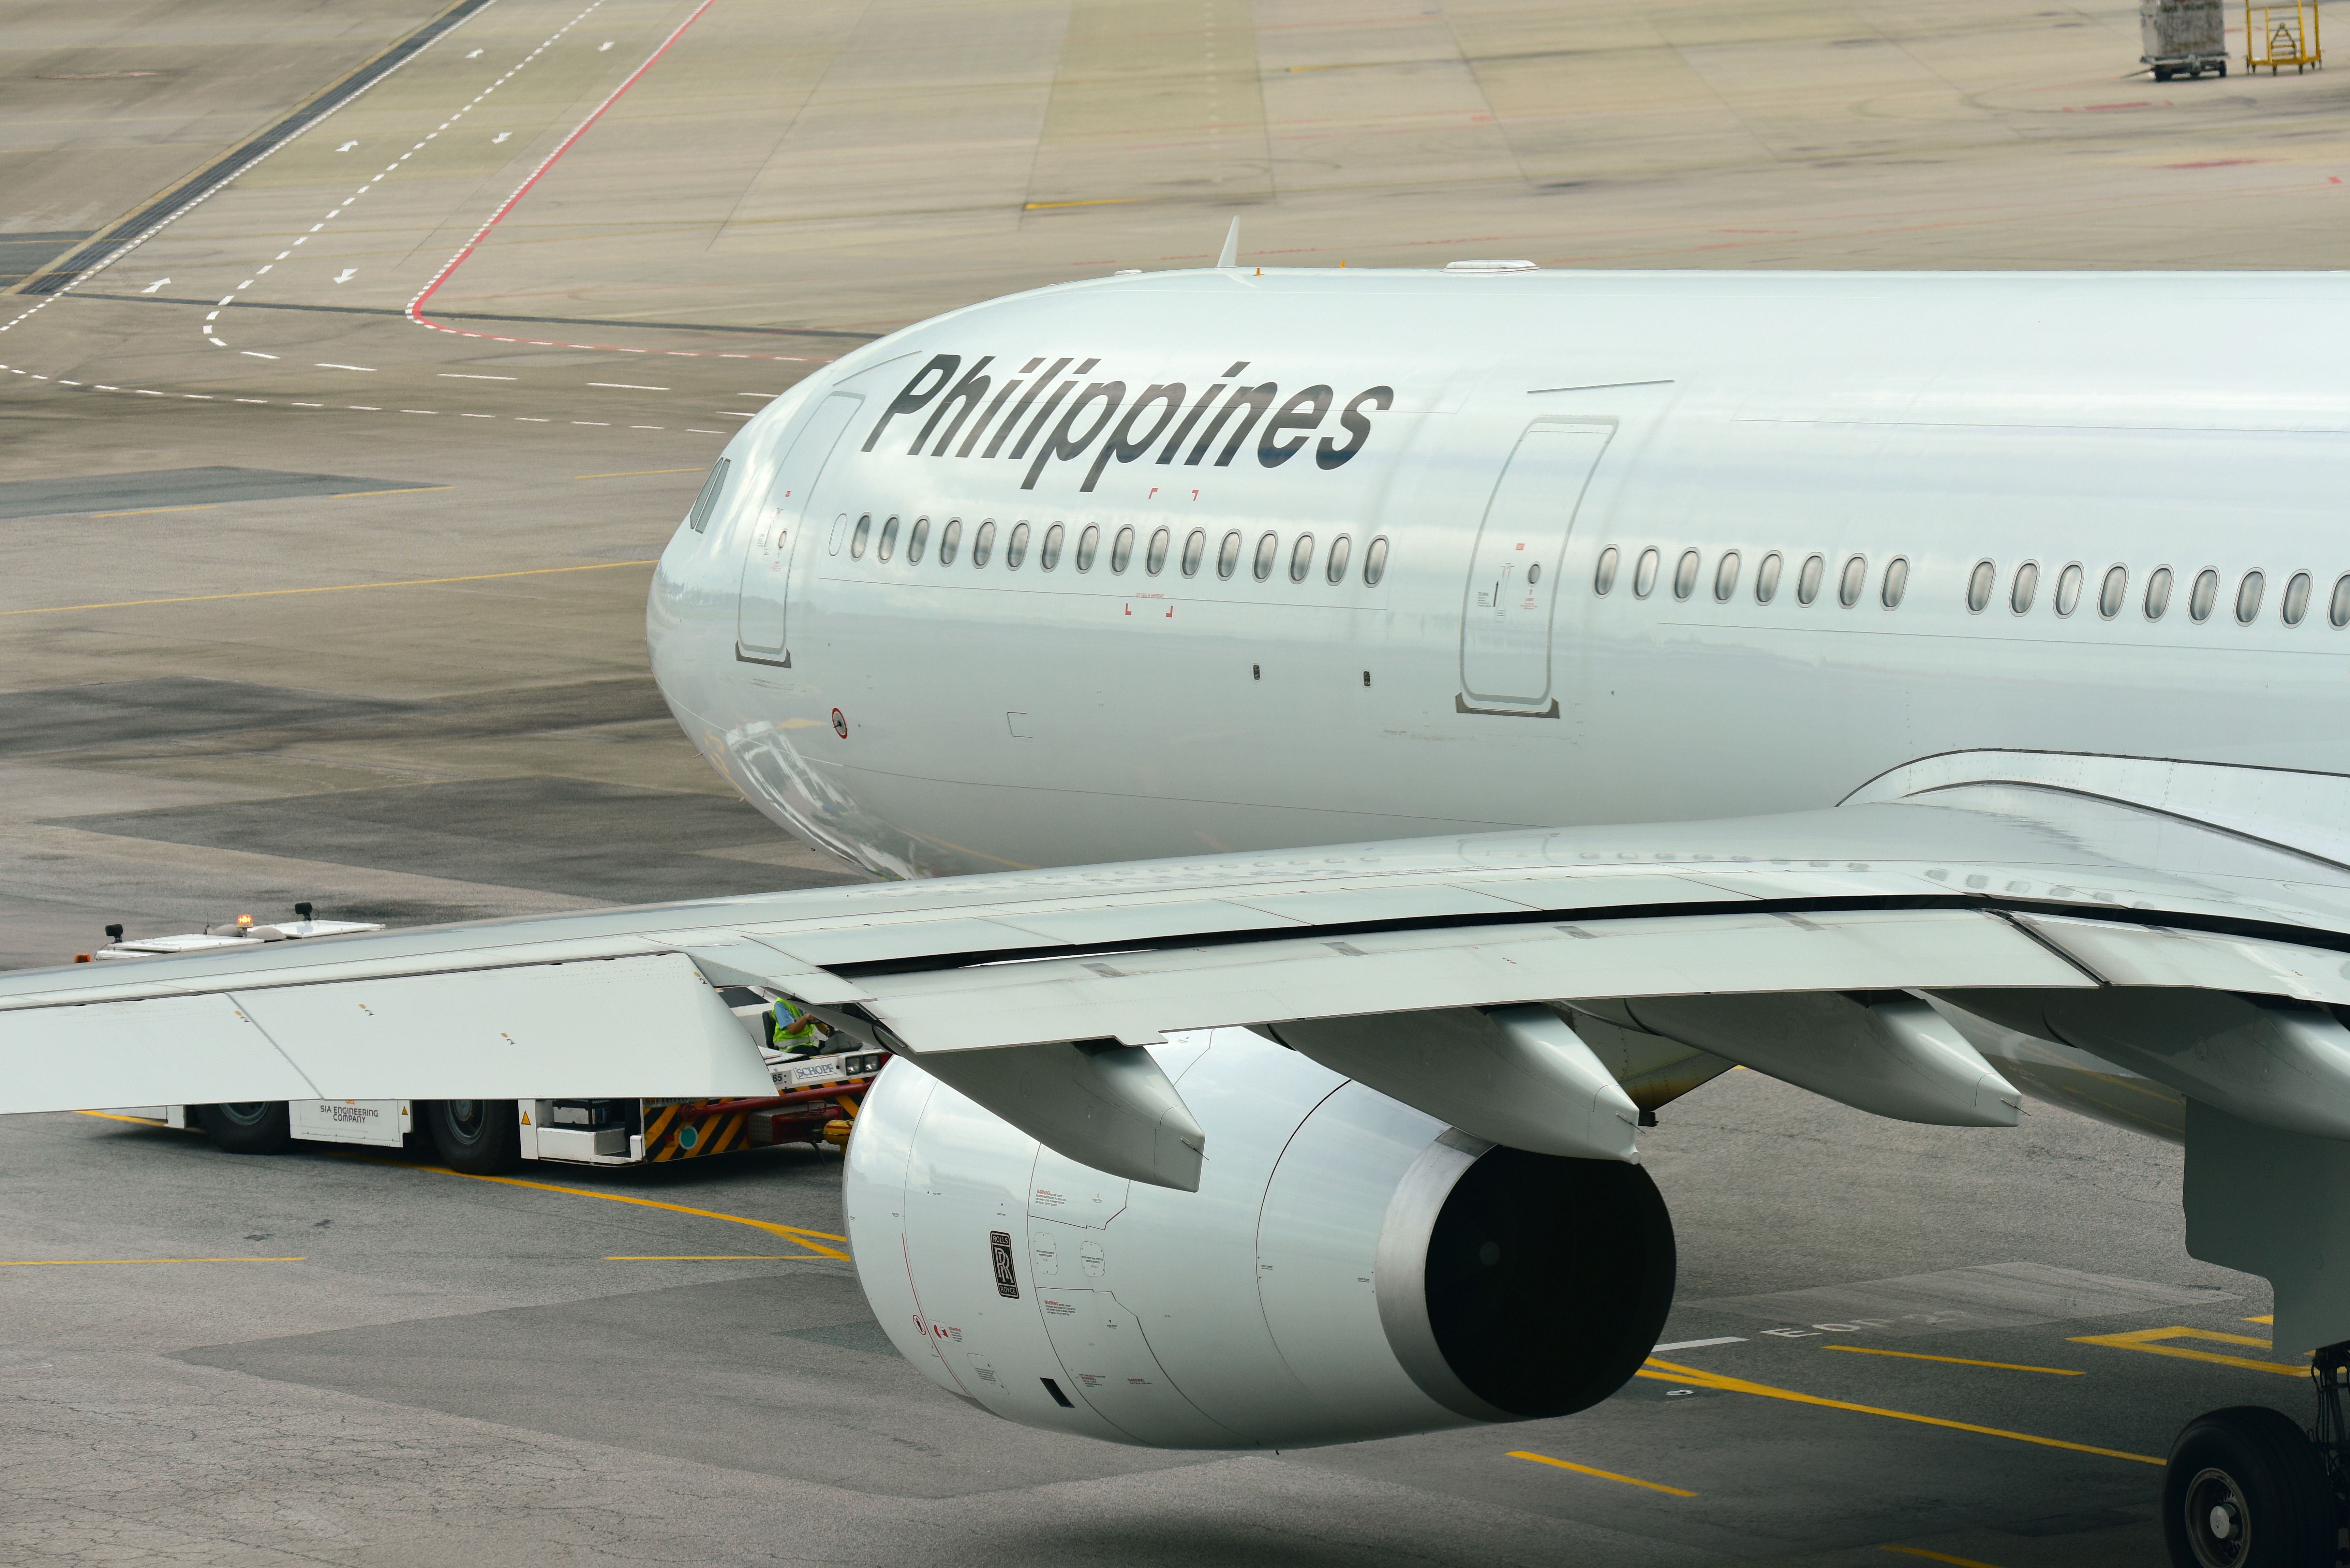 Philippines Airlines Airbus 330 on the tarmac at Singapore Changi Airport